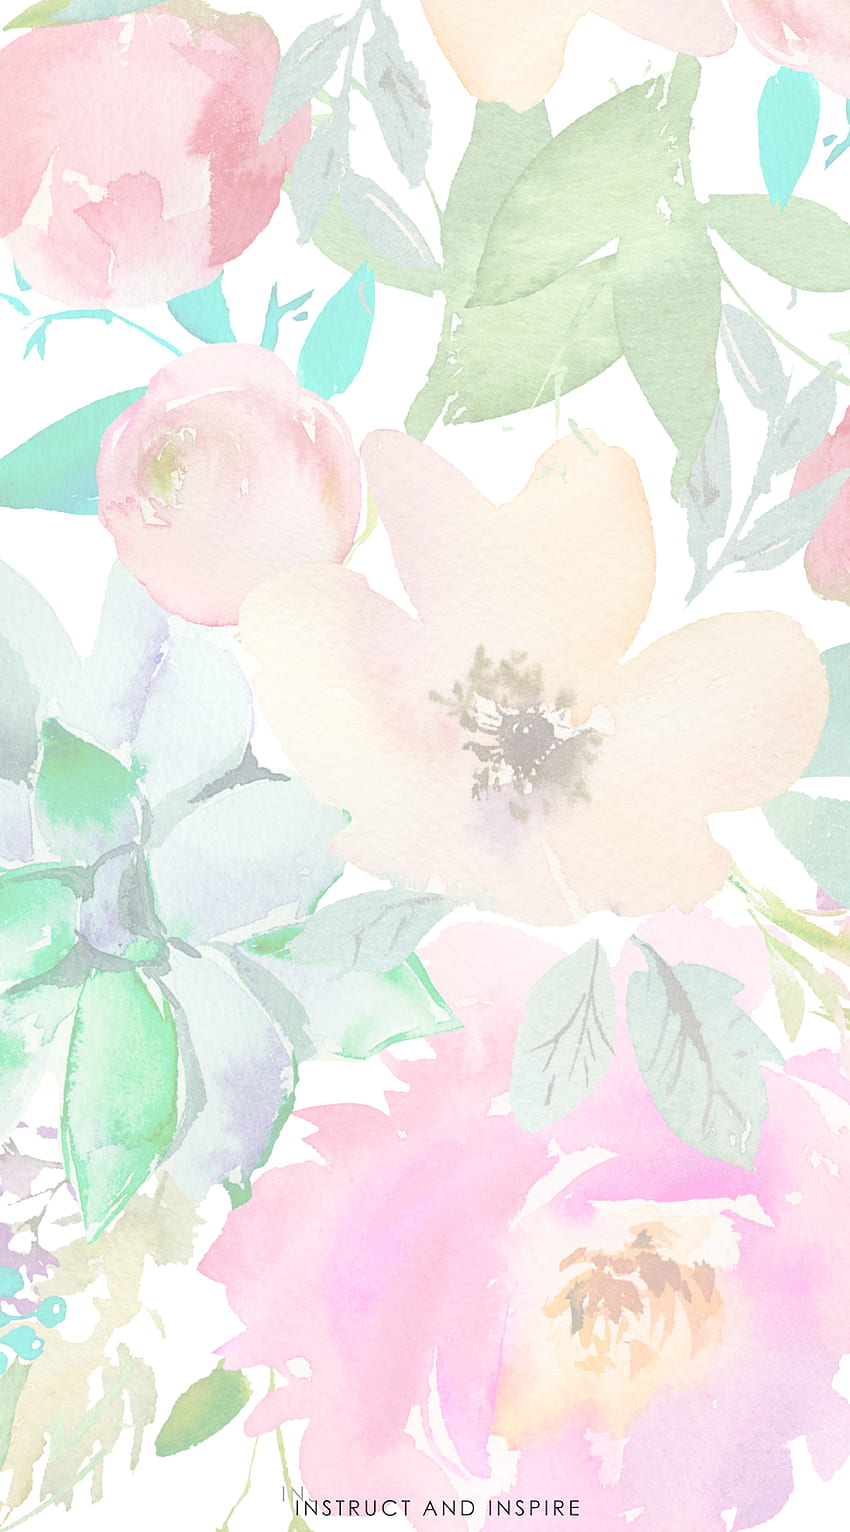 March 2019 . Instruct and Inspire, Watercolor Floral HD phone wallpaper